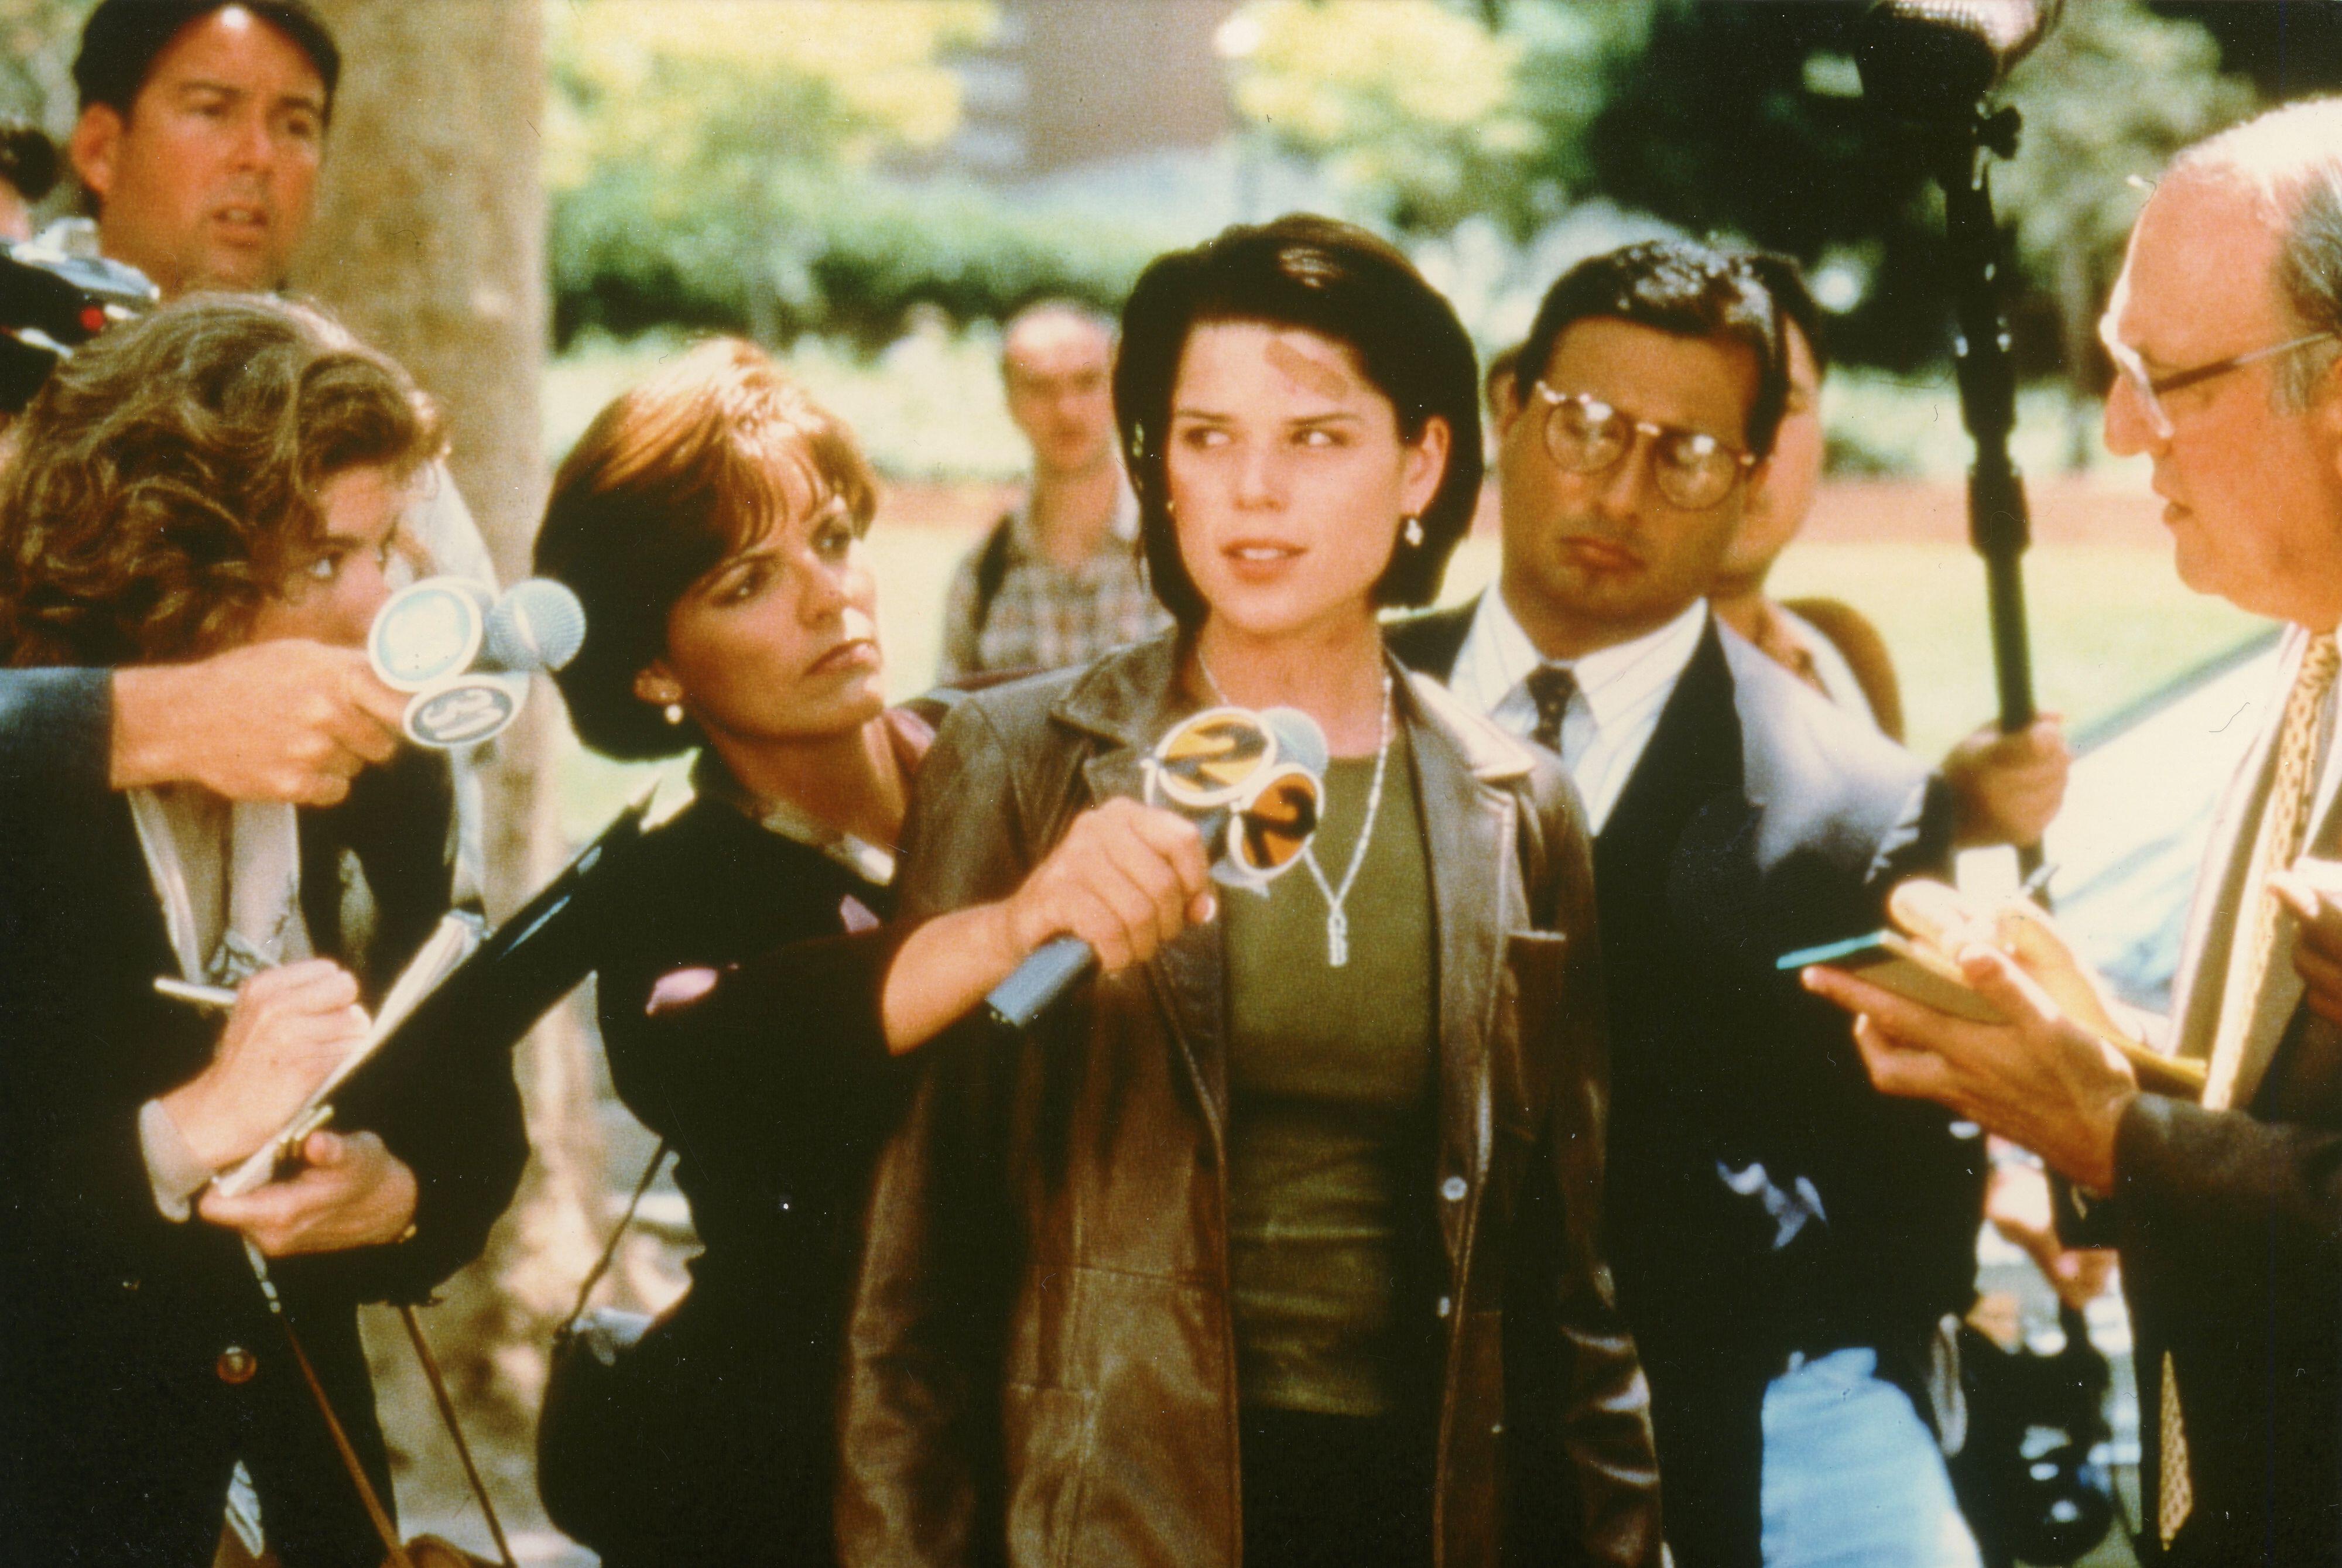 Neve Campbell (as Sidney Prescott) speaking to reporters in the film Scream 2